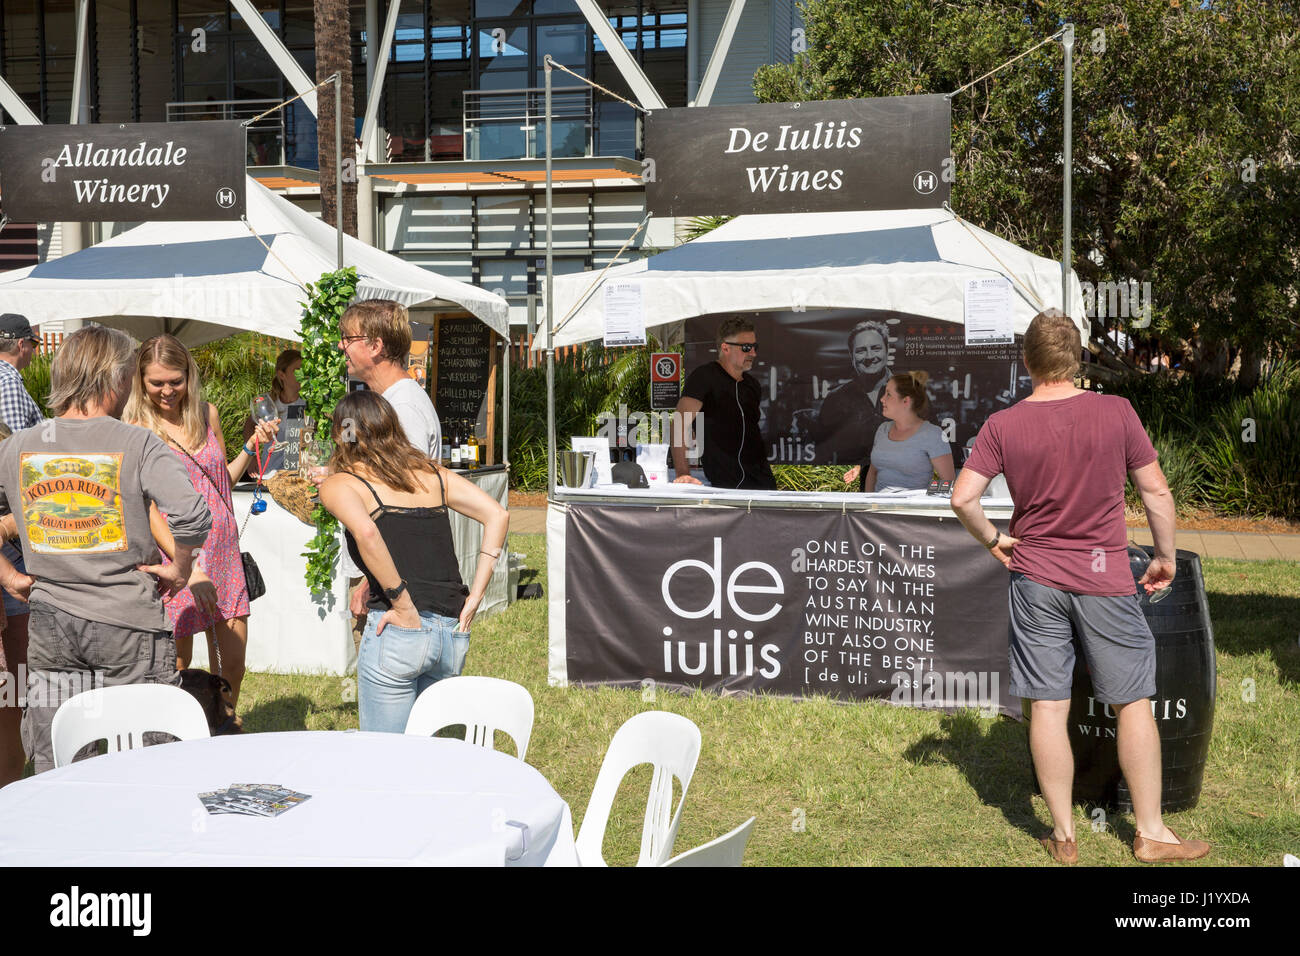 Sydney, Australia. 23rd April, 2017. Sunday 23rd April 2017. The sights and sounds of the Hunter Valley wine growers arrive in Avalon on Sydney's northern beaches for a food and wine festival event. Sydney,Australia Credit: martin berry/Alamy Live News Stock Photo